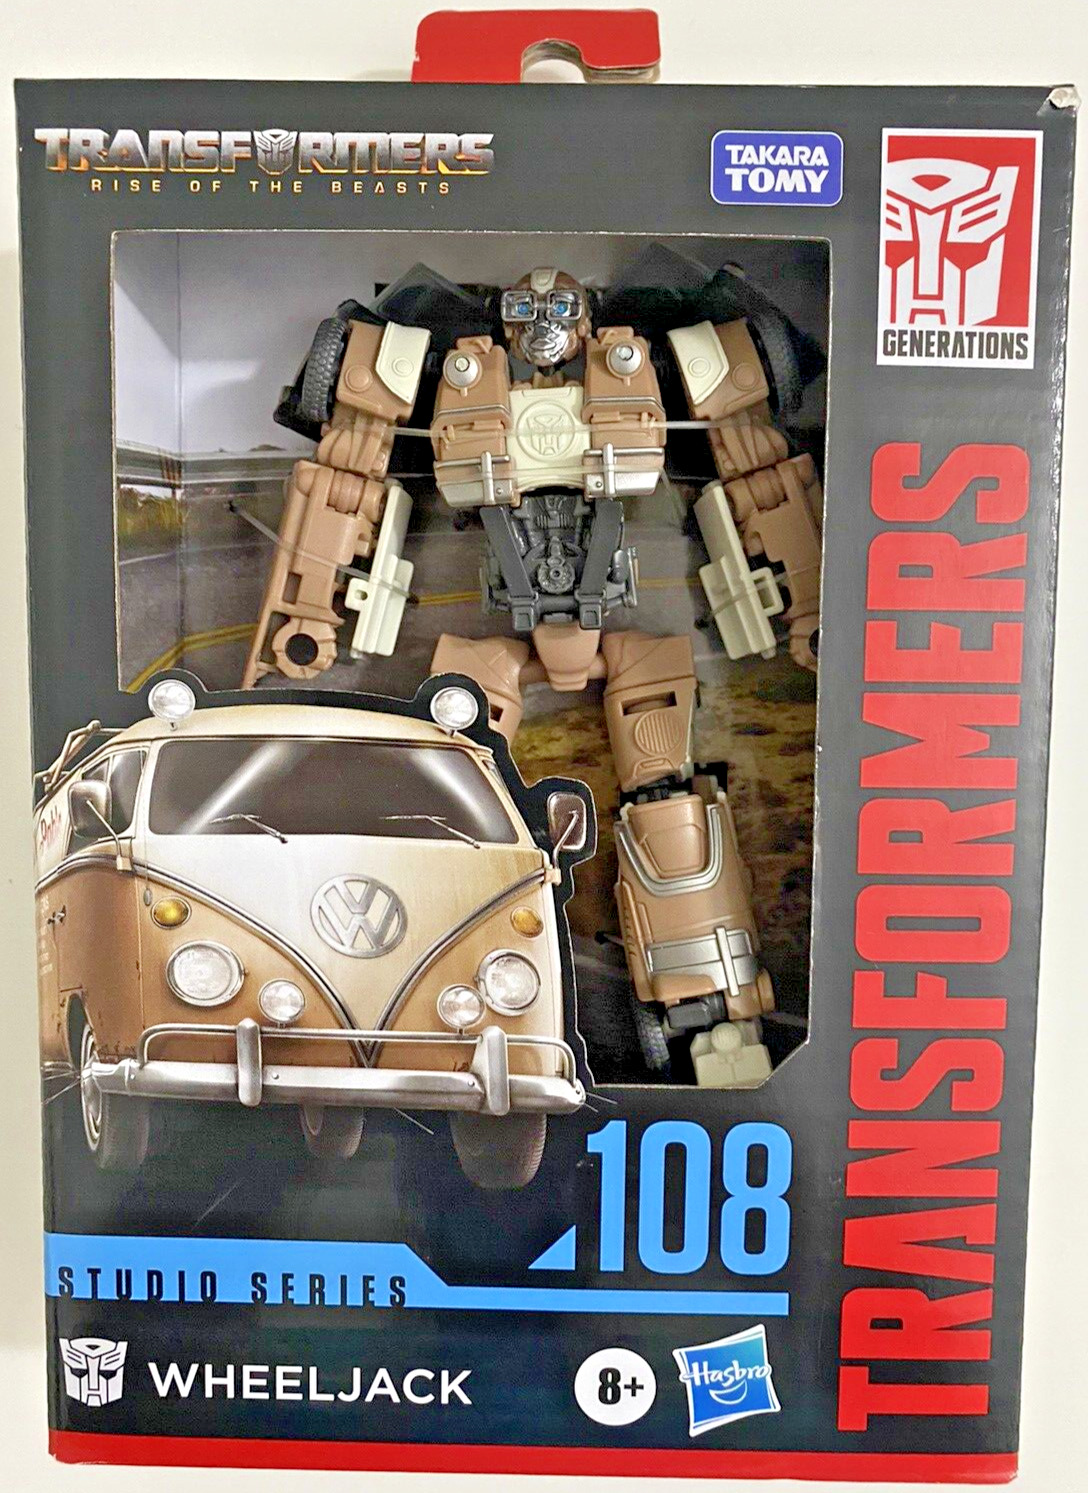 Transformers Rise Of The Beasts Wheeljack Studio Series 108 Deluxe Class